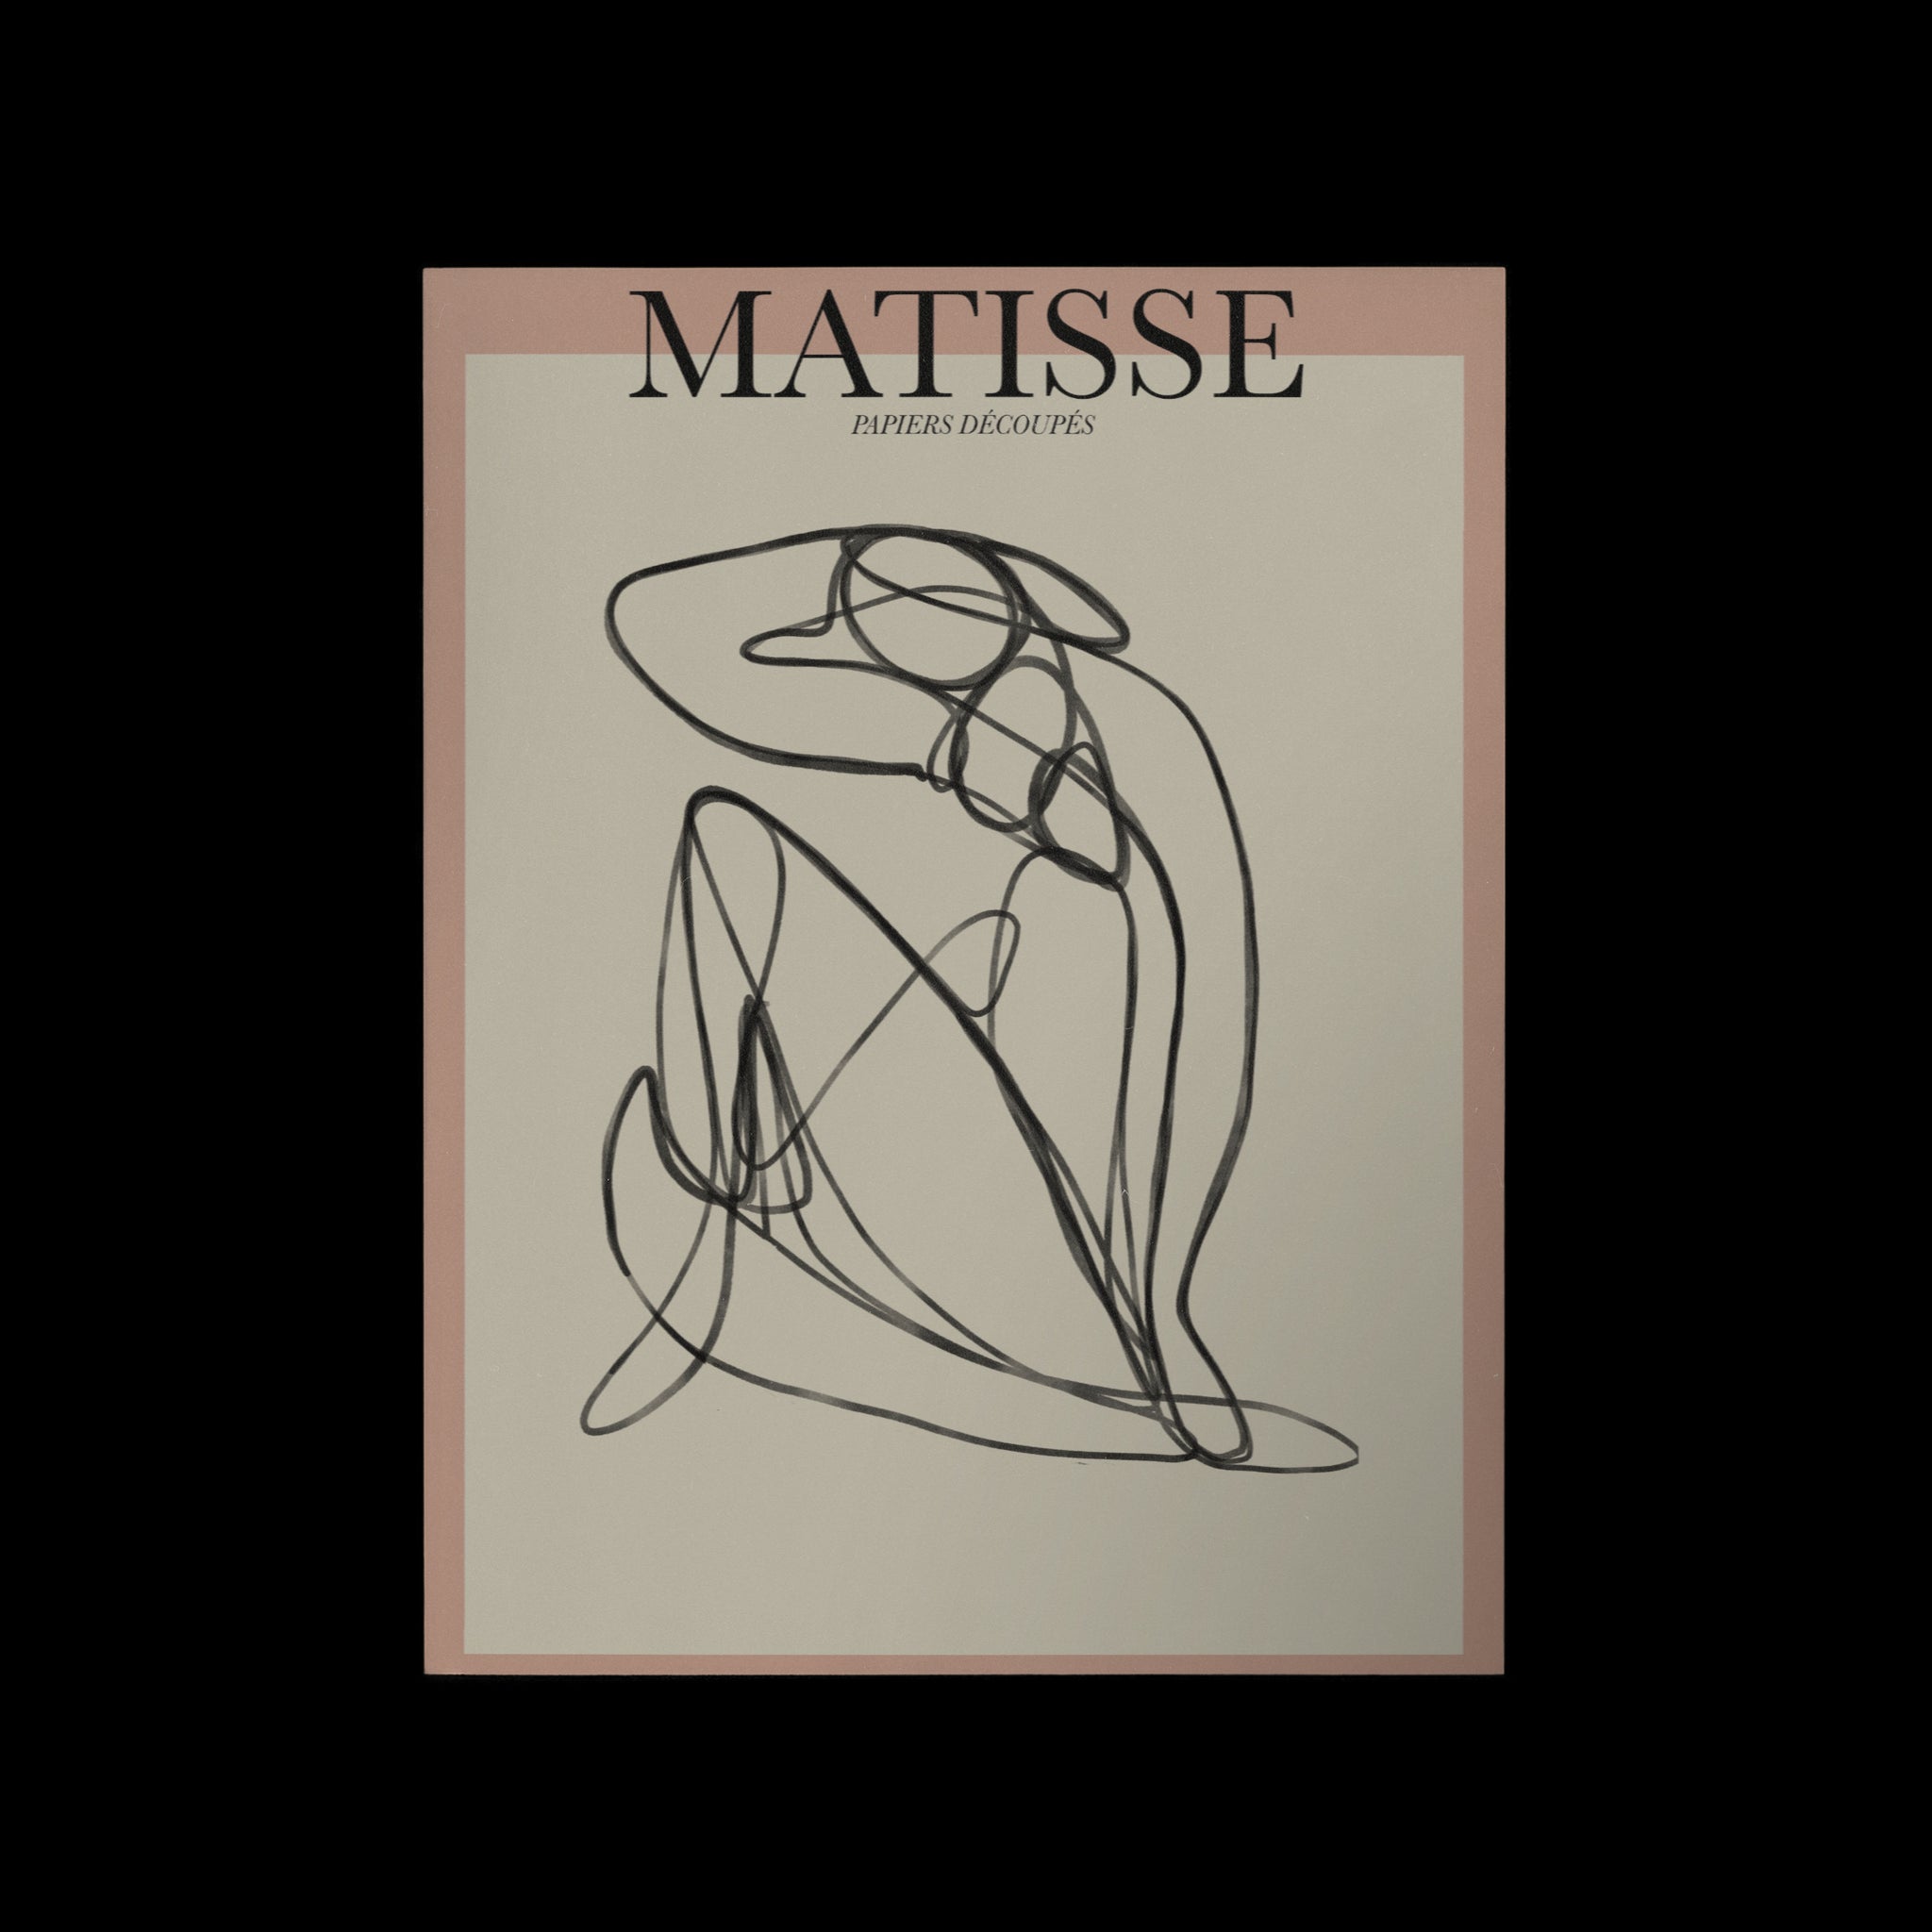 © les muses / Matisse wall art prints featuring nude figure line art or "Papiers Découpés" in a danish pastel style. Matisse exhibition posters with line art figures. Berggruen & Cie museum prints for your gallery wall. 
